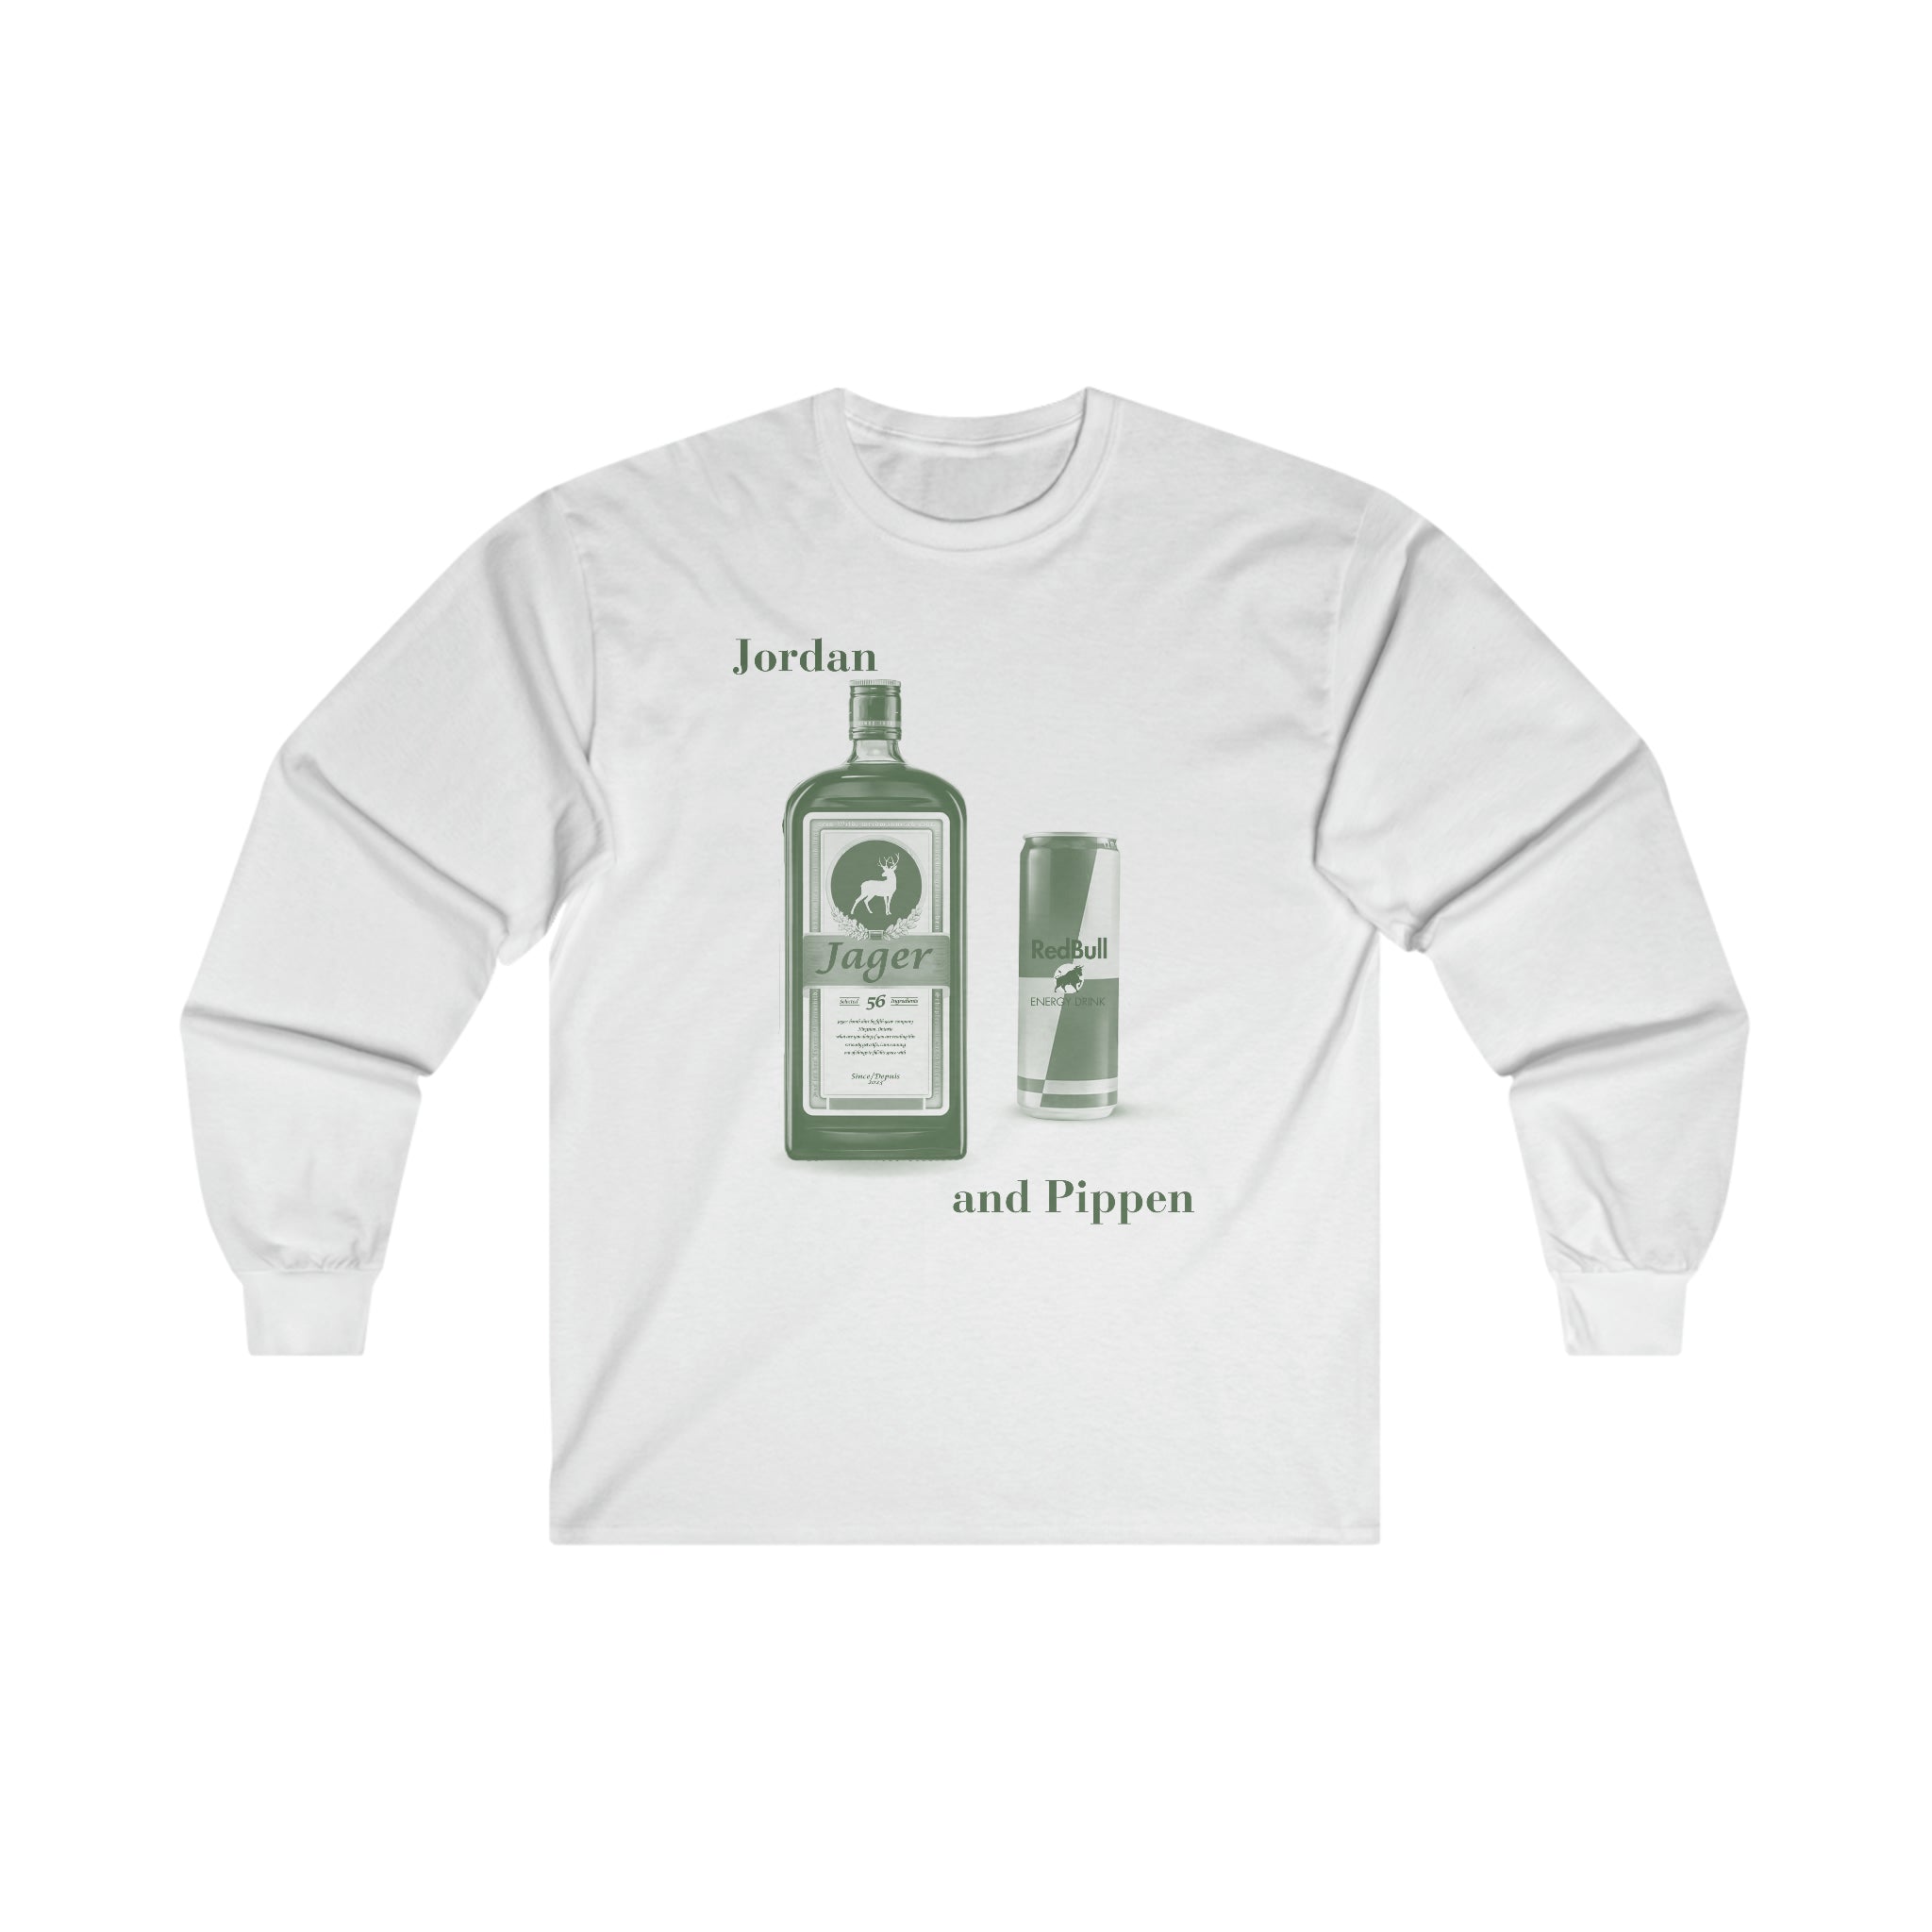 Jordan and Pippen Jagerbomb - Ultra Cotton Long Sleeve Tee